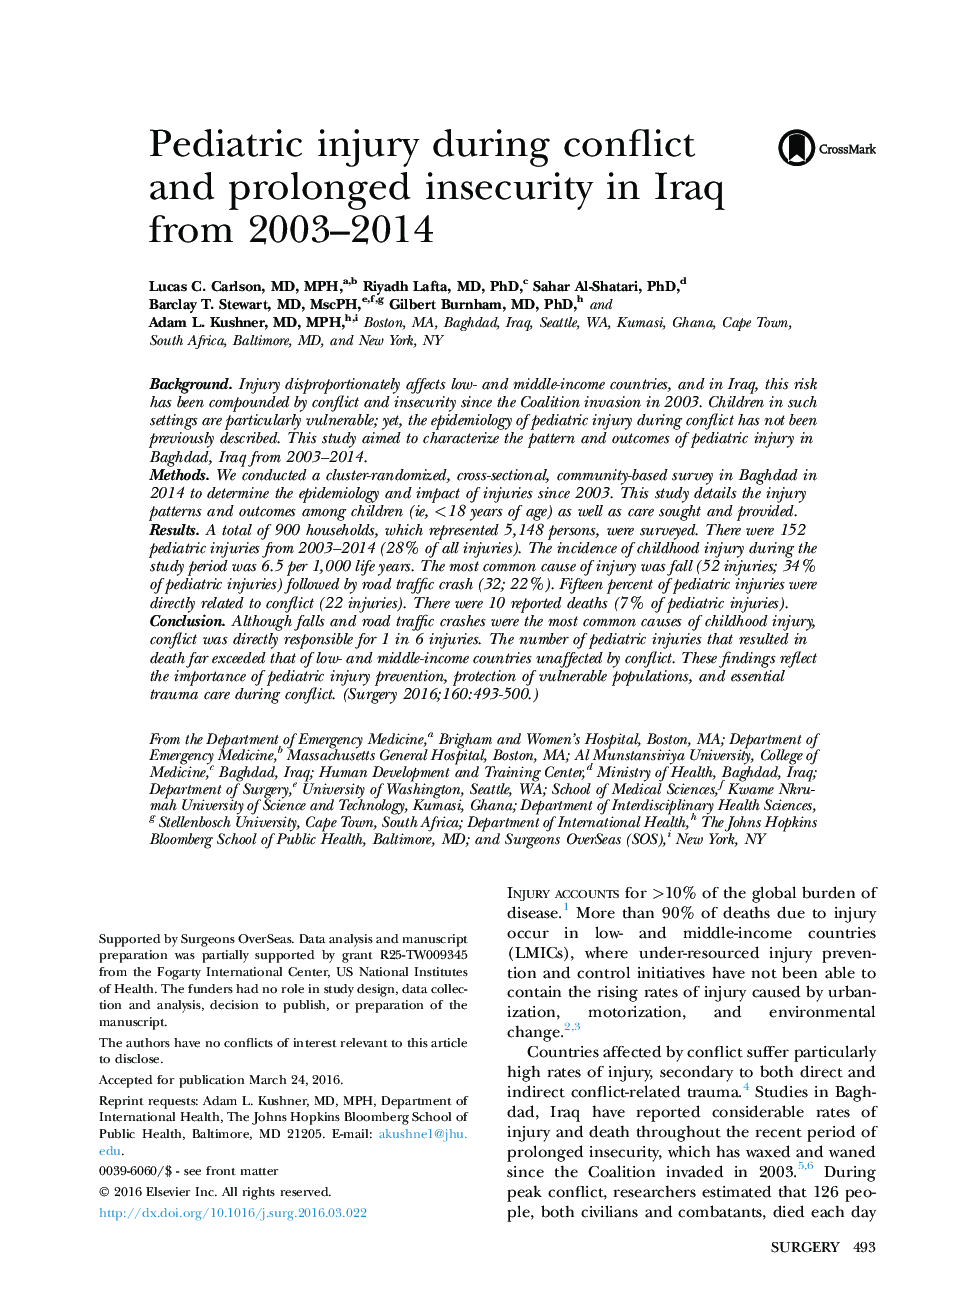 PediatricsPediatric injury during conflict and prolonged insecurity in Iraq from 2003-2014